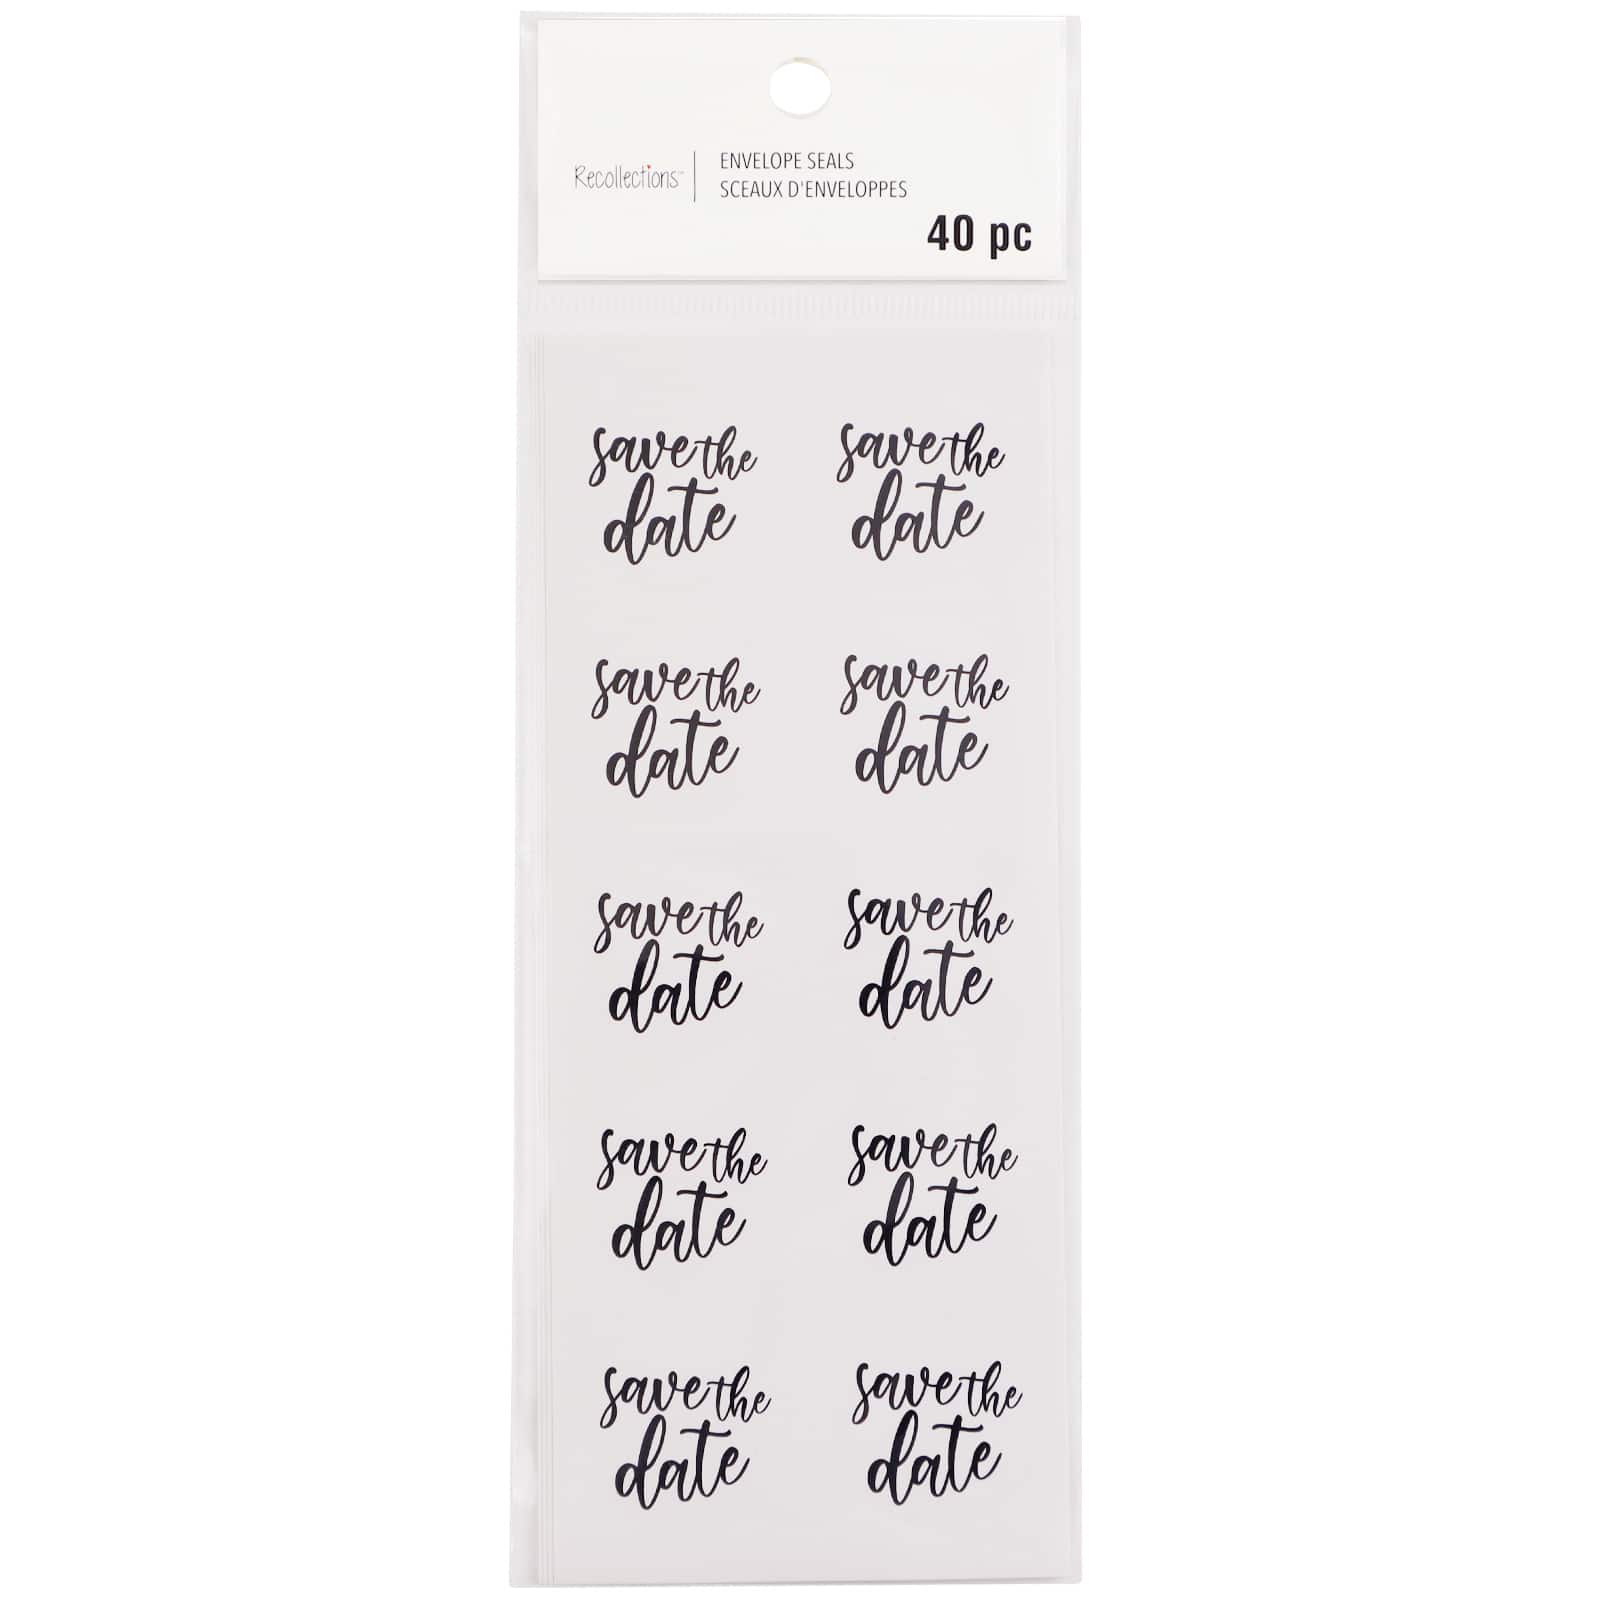  126-1 Save The Date Stickers, Save The Date Envelope Seals  (#151-WT) : Handmade Products